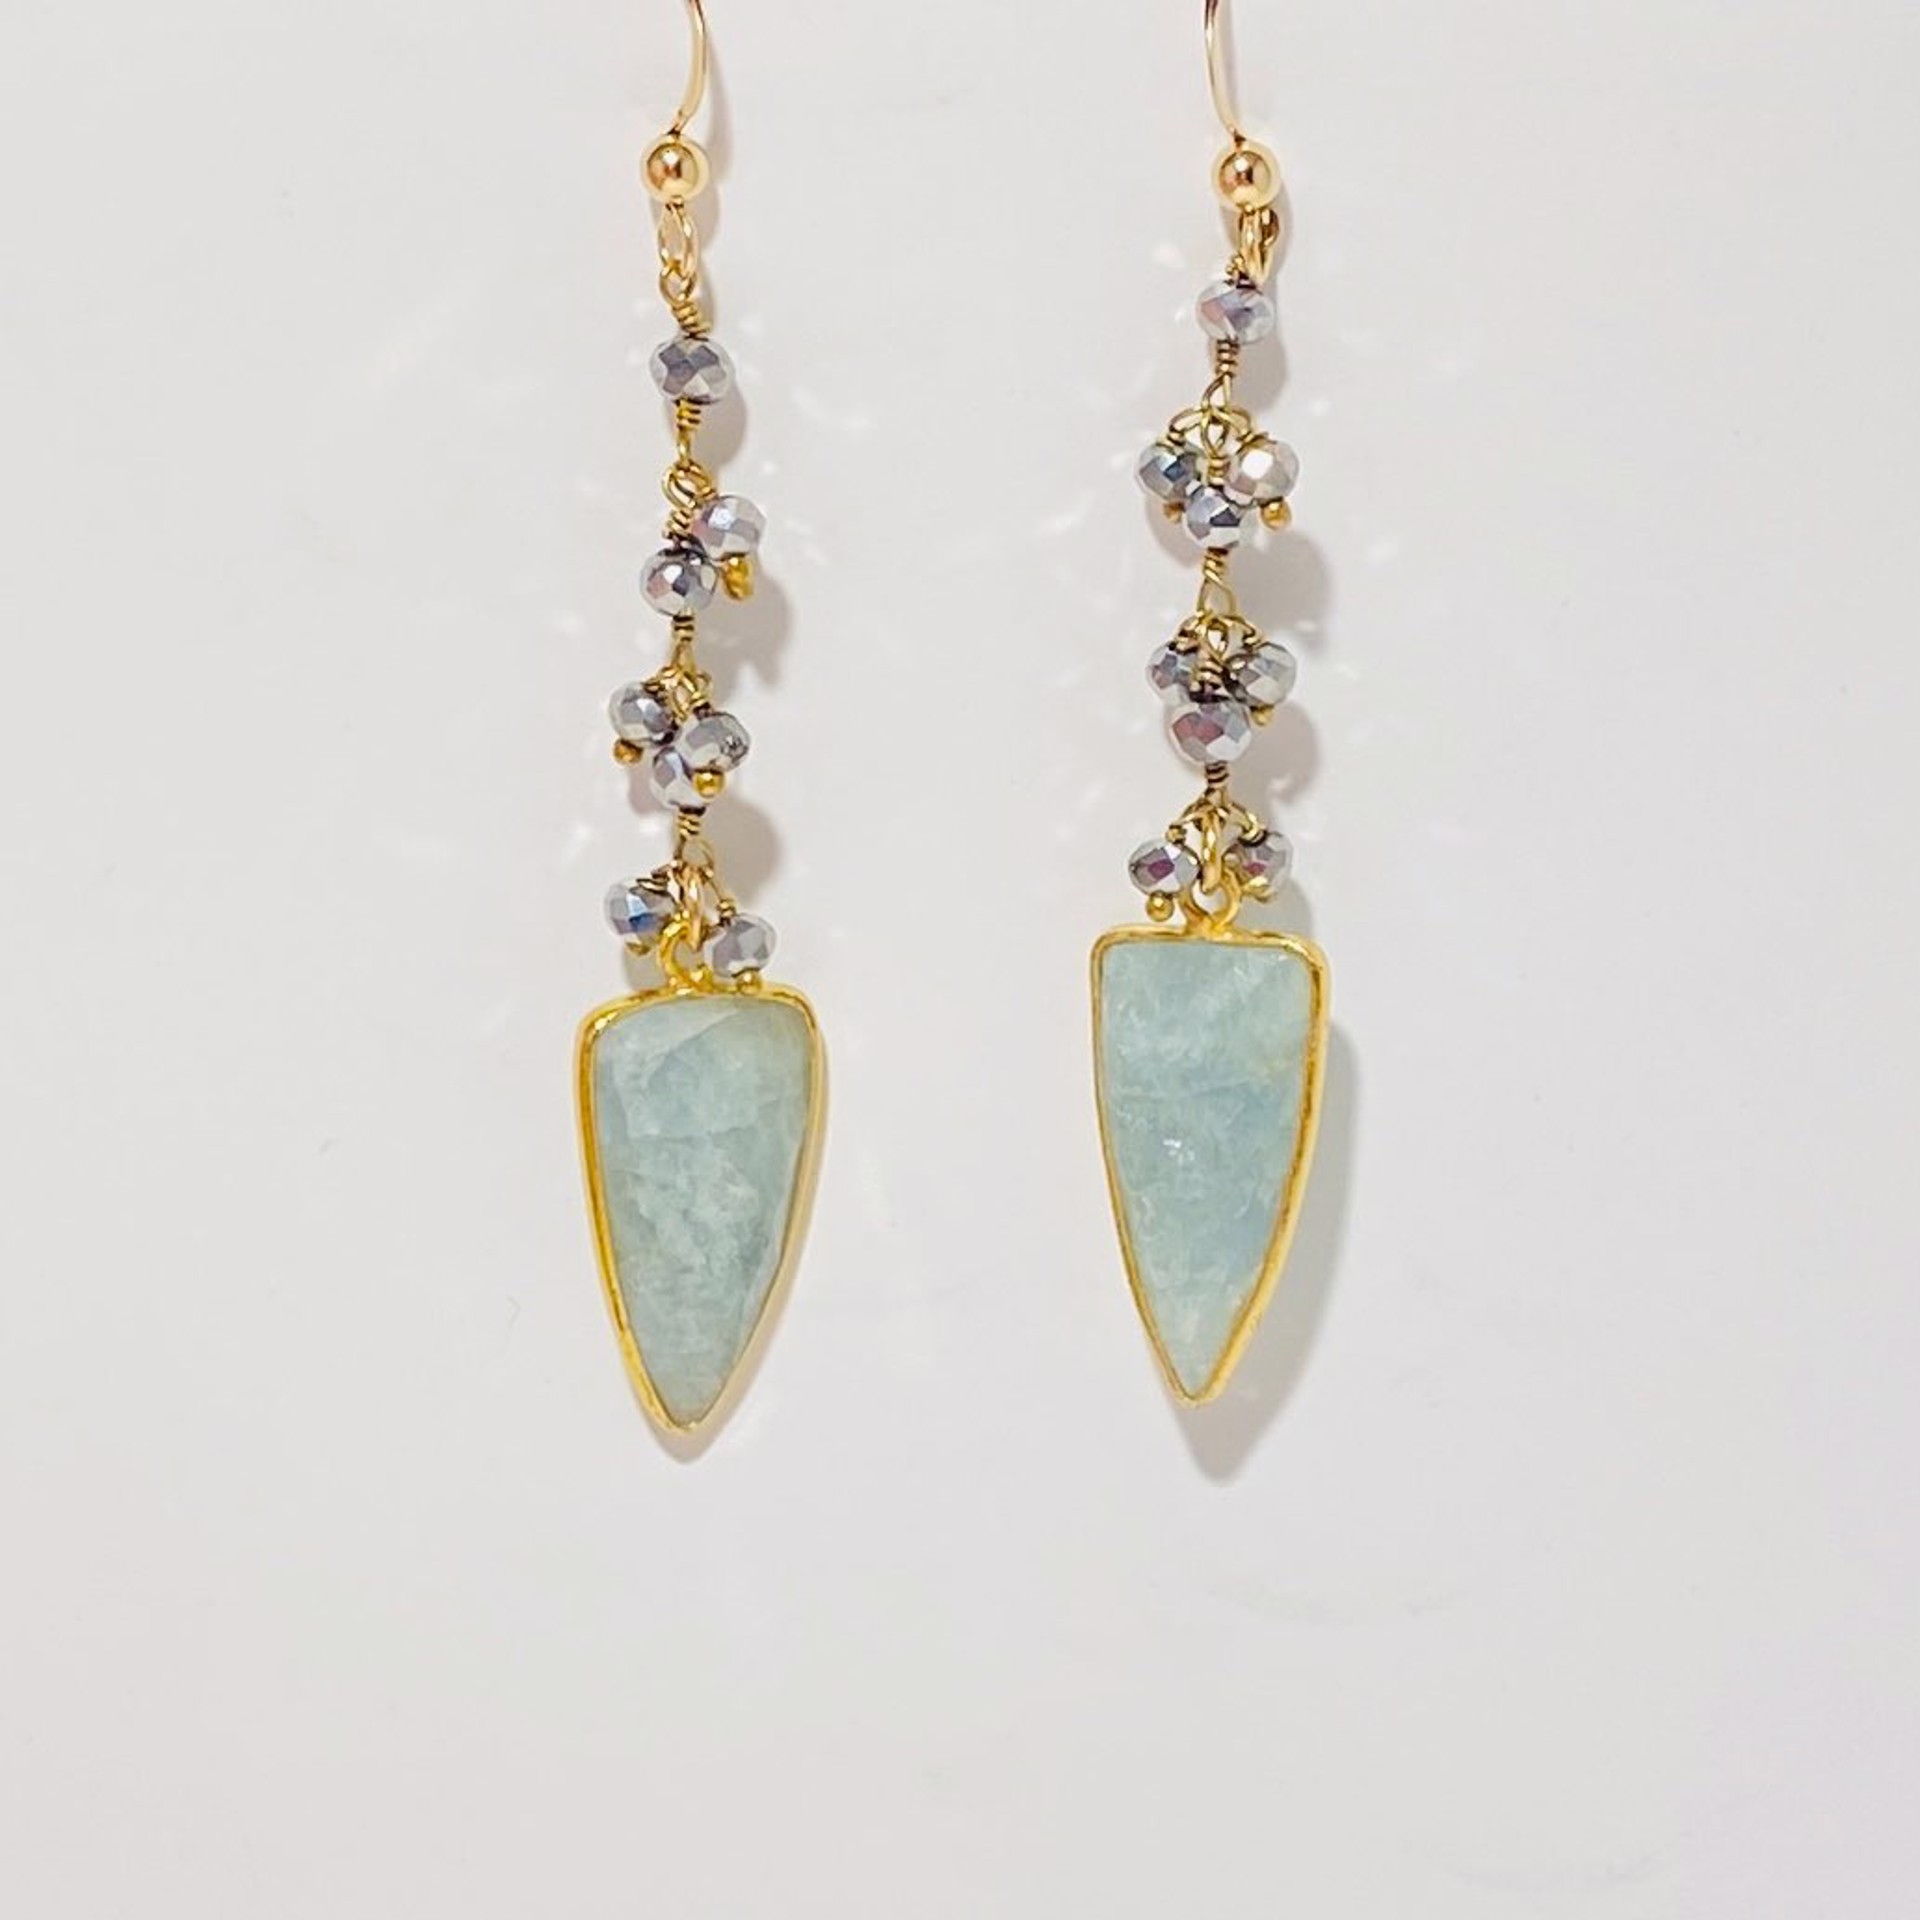 Faceted Beryl Drop in Vermeil, Faceted Pyrite Earrings LR23-32 by Legare Riano